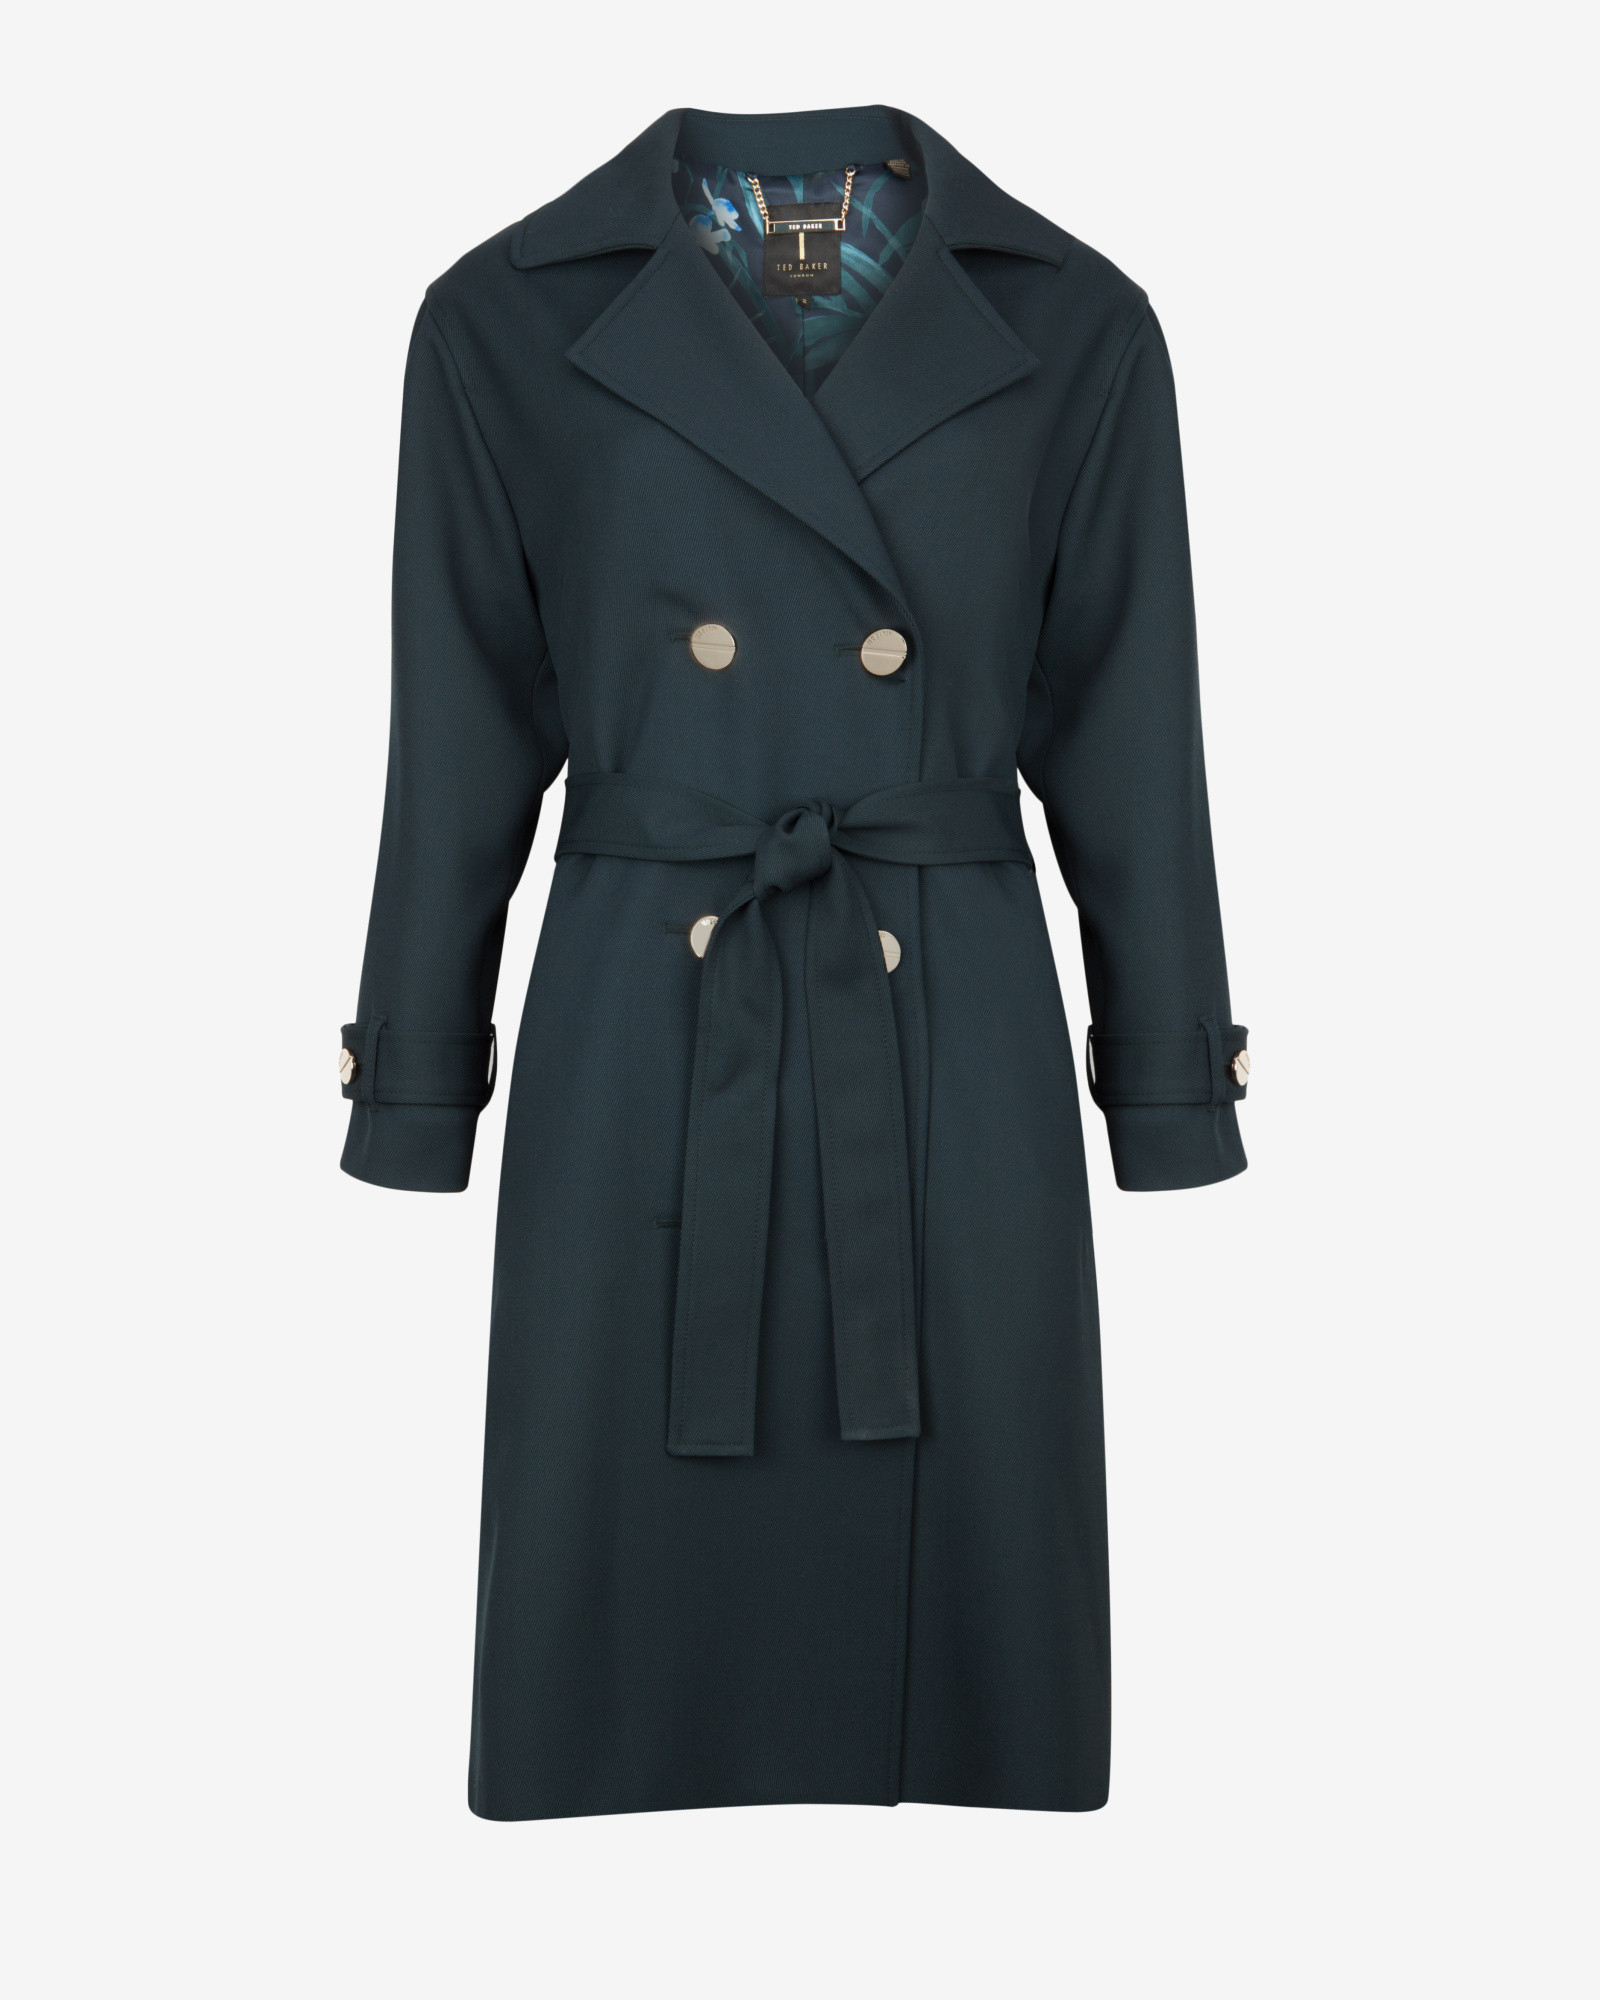 Ted Baker Wool Double Breasted Trench Coat in Dark Green (Green) - Lyst